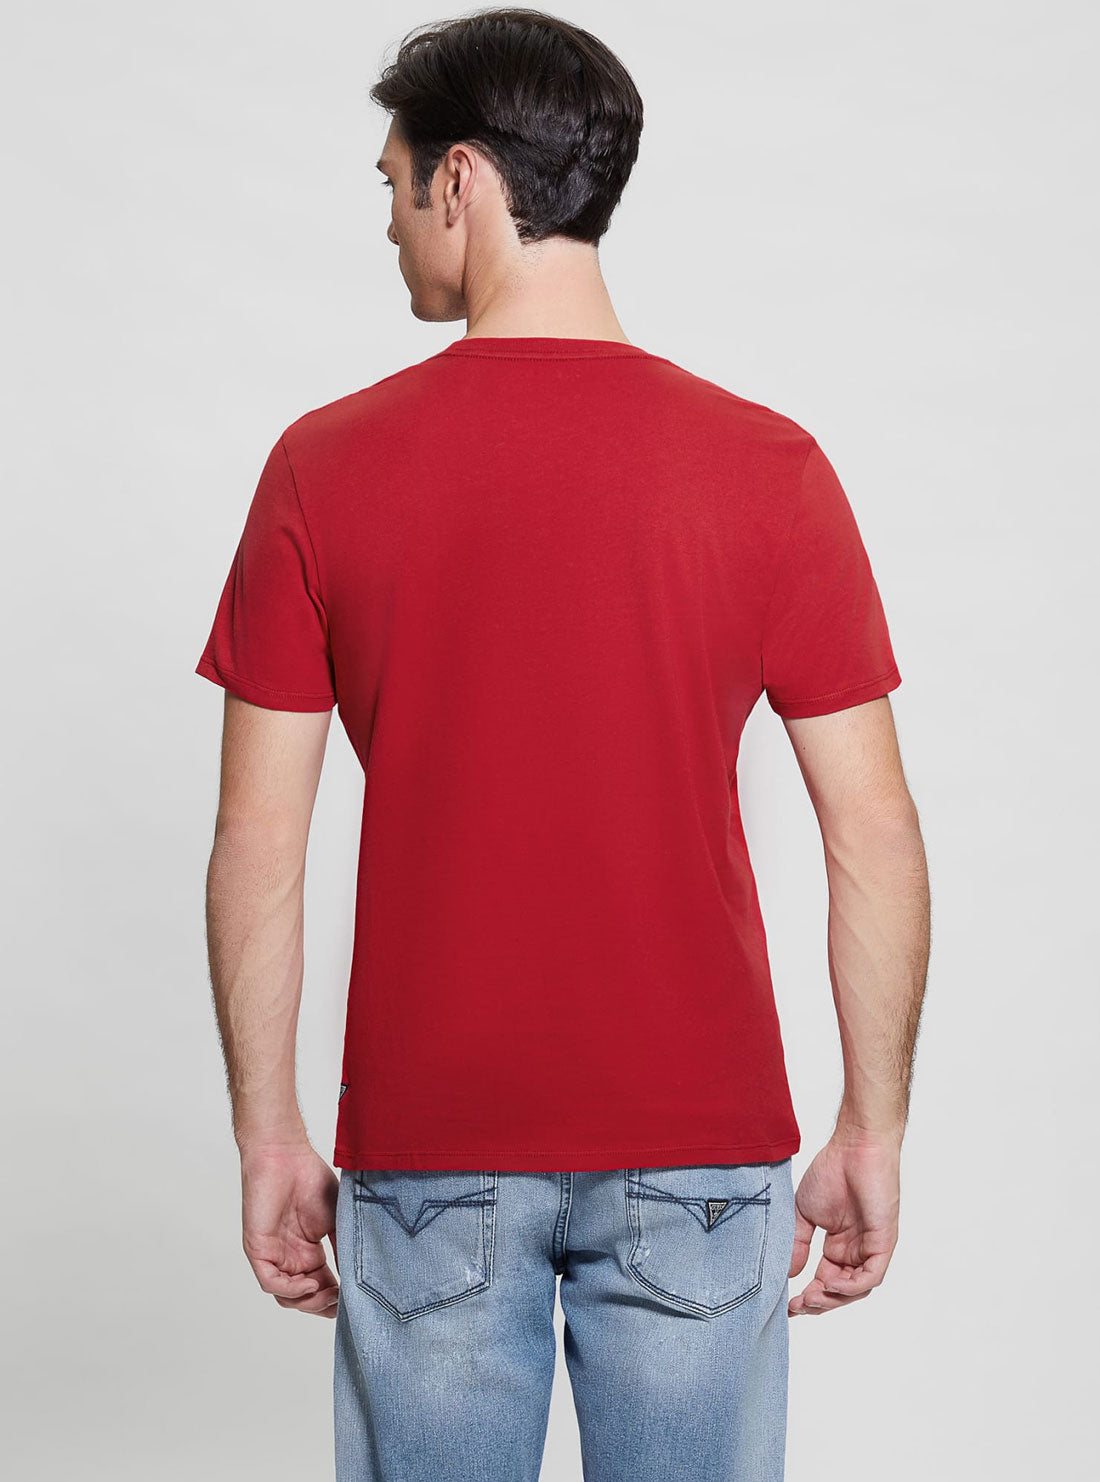 GUESS Red Foil Logo Short Sleeve T-Shirt back view